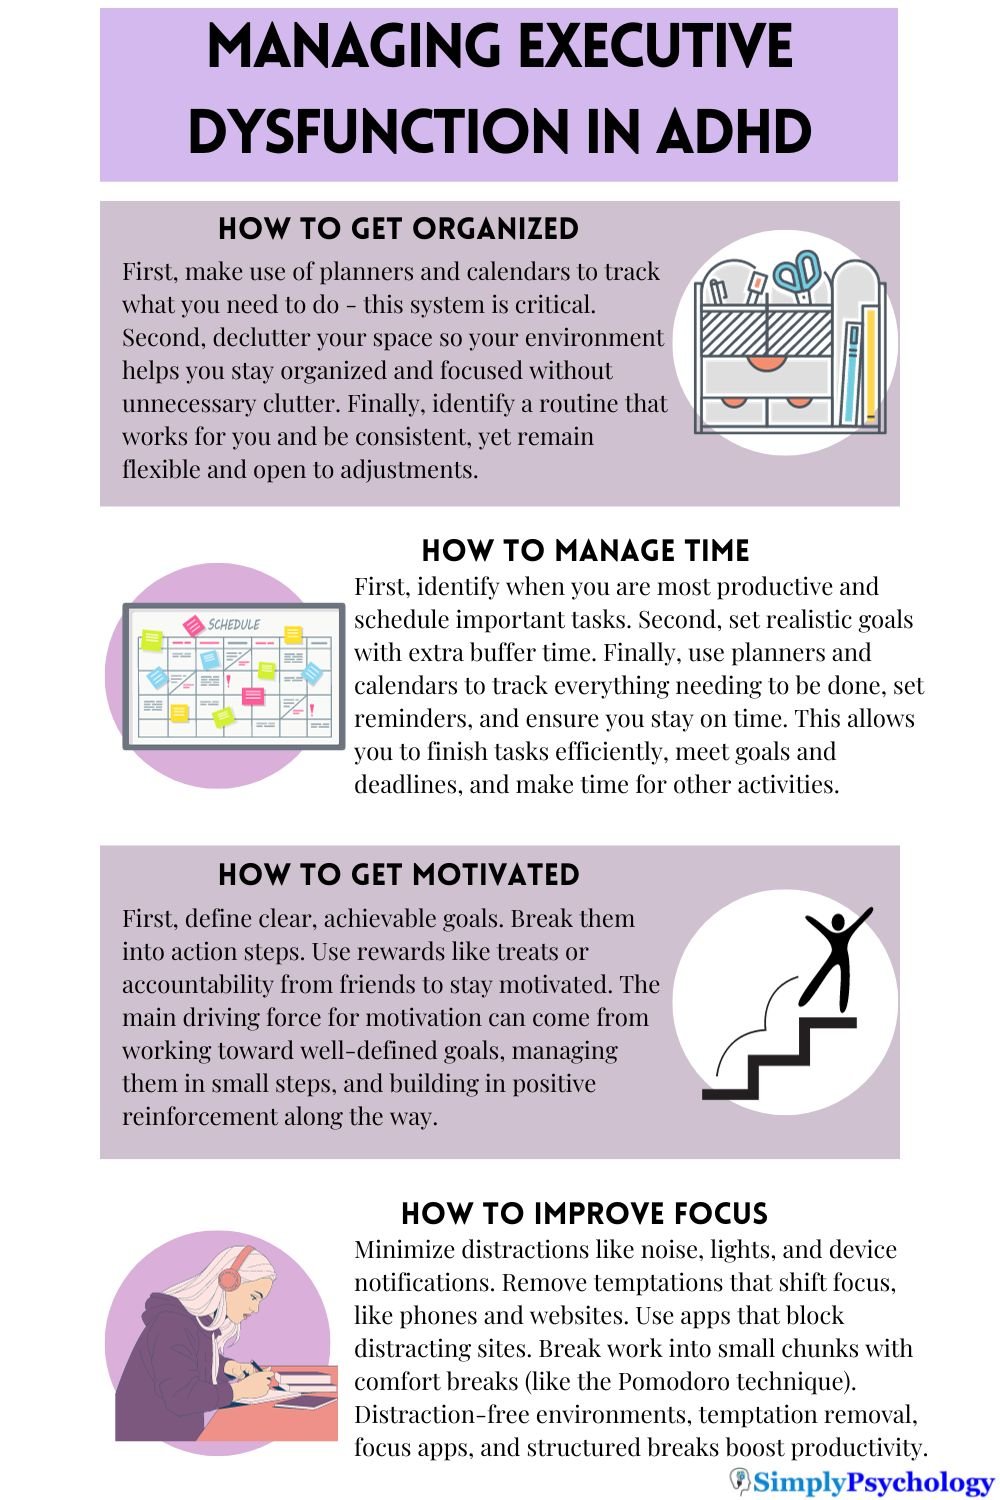 an infographic explaining the ways in which executive dysfunction in ADHD can be managed